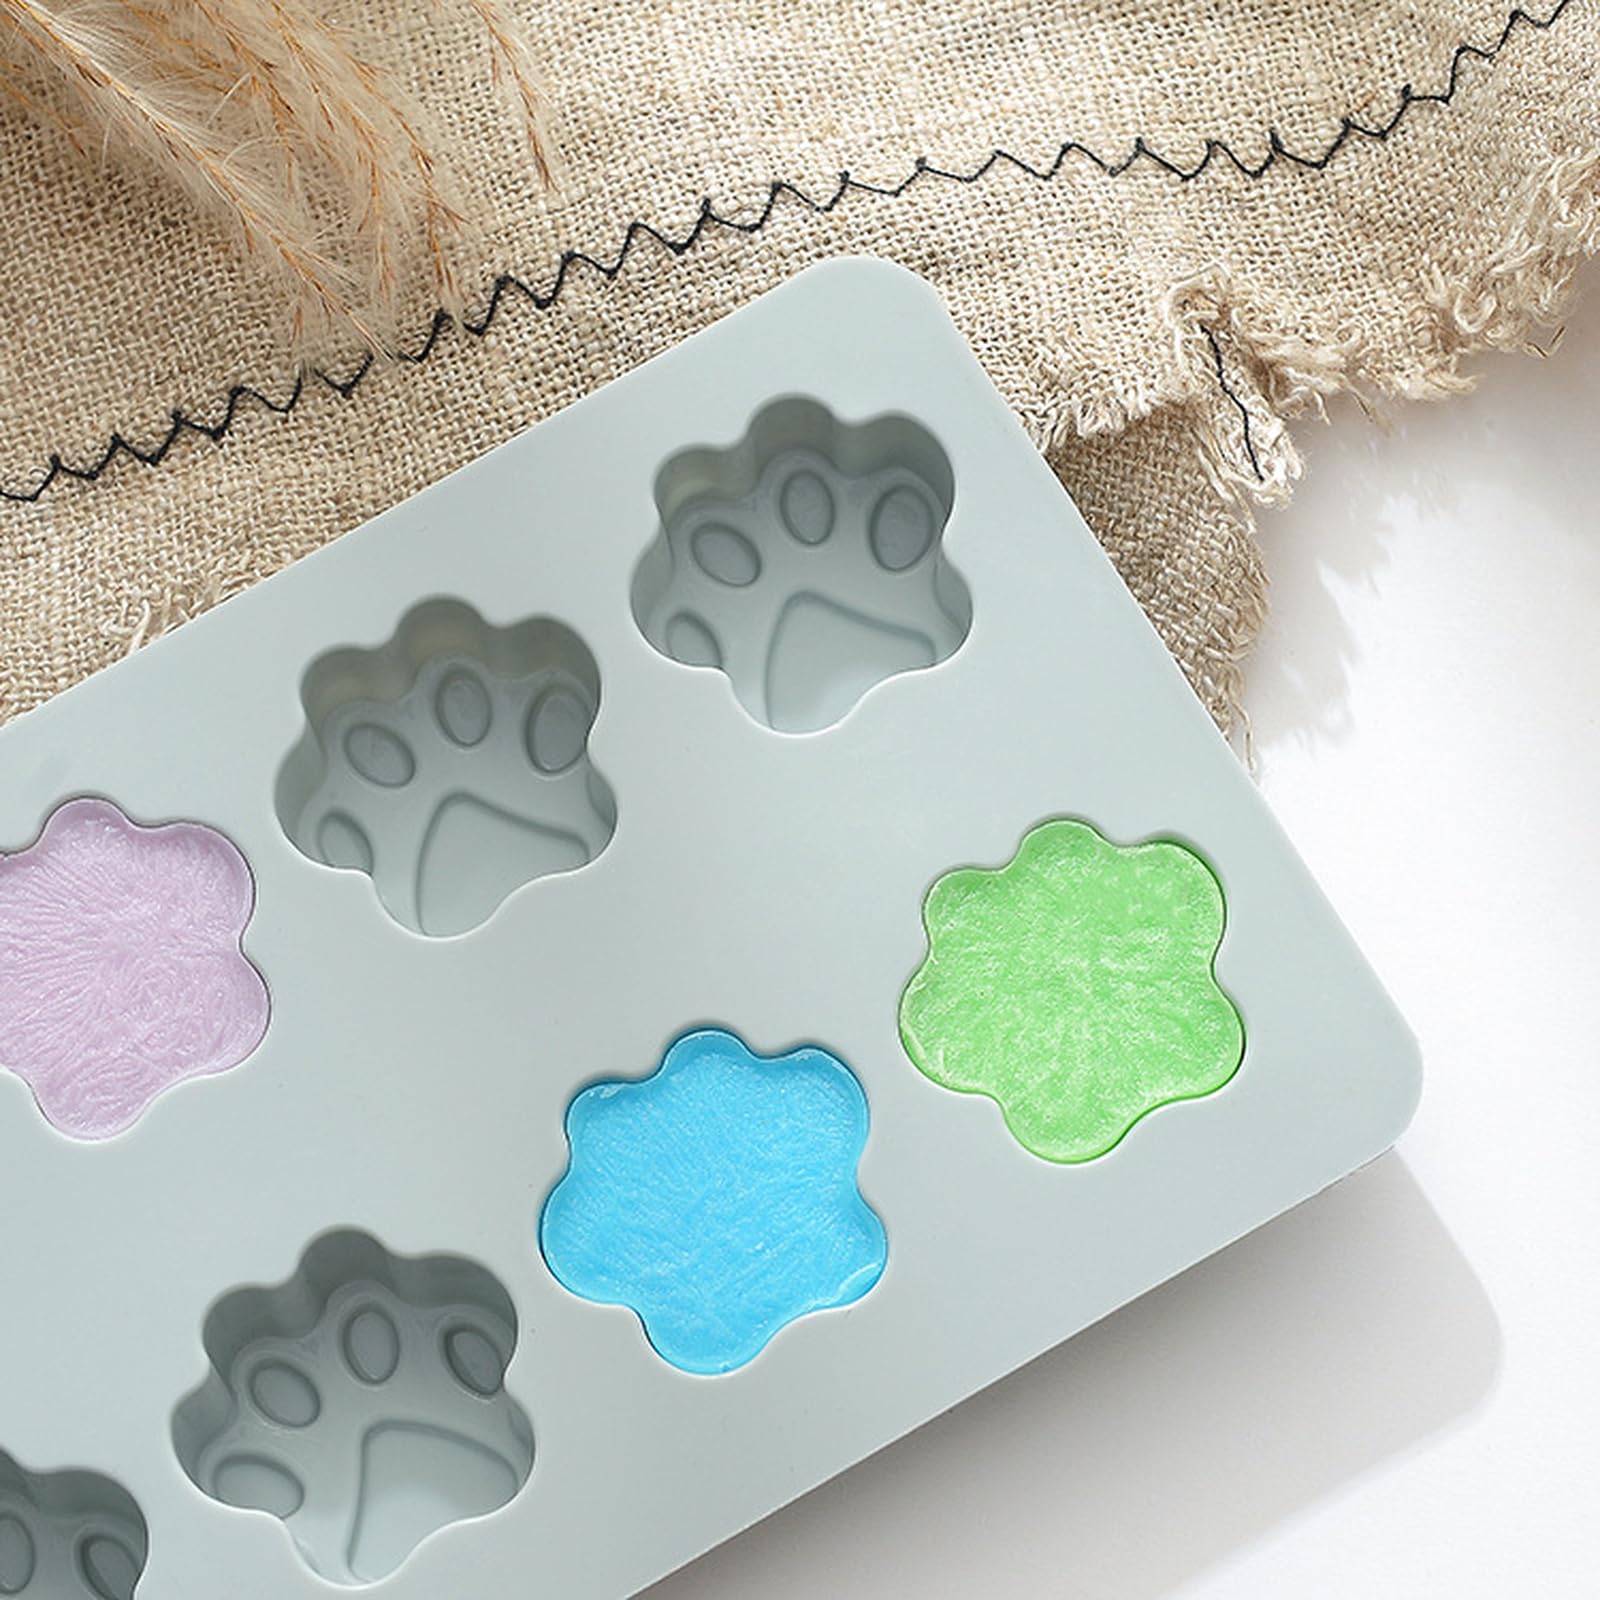 10 Cat Claw Silicone Baking Mold Ice Brown Sugar Chocolate Ice Grid Mold Rice Cake Cake Mold